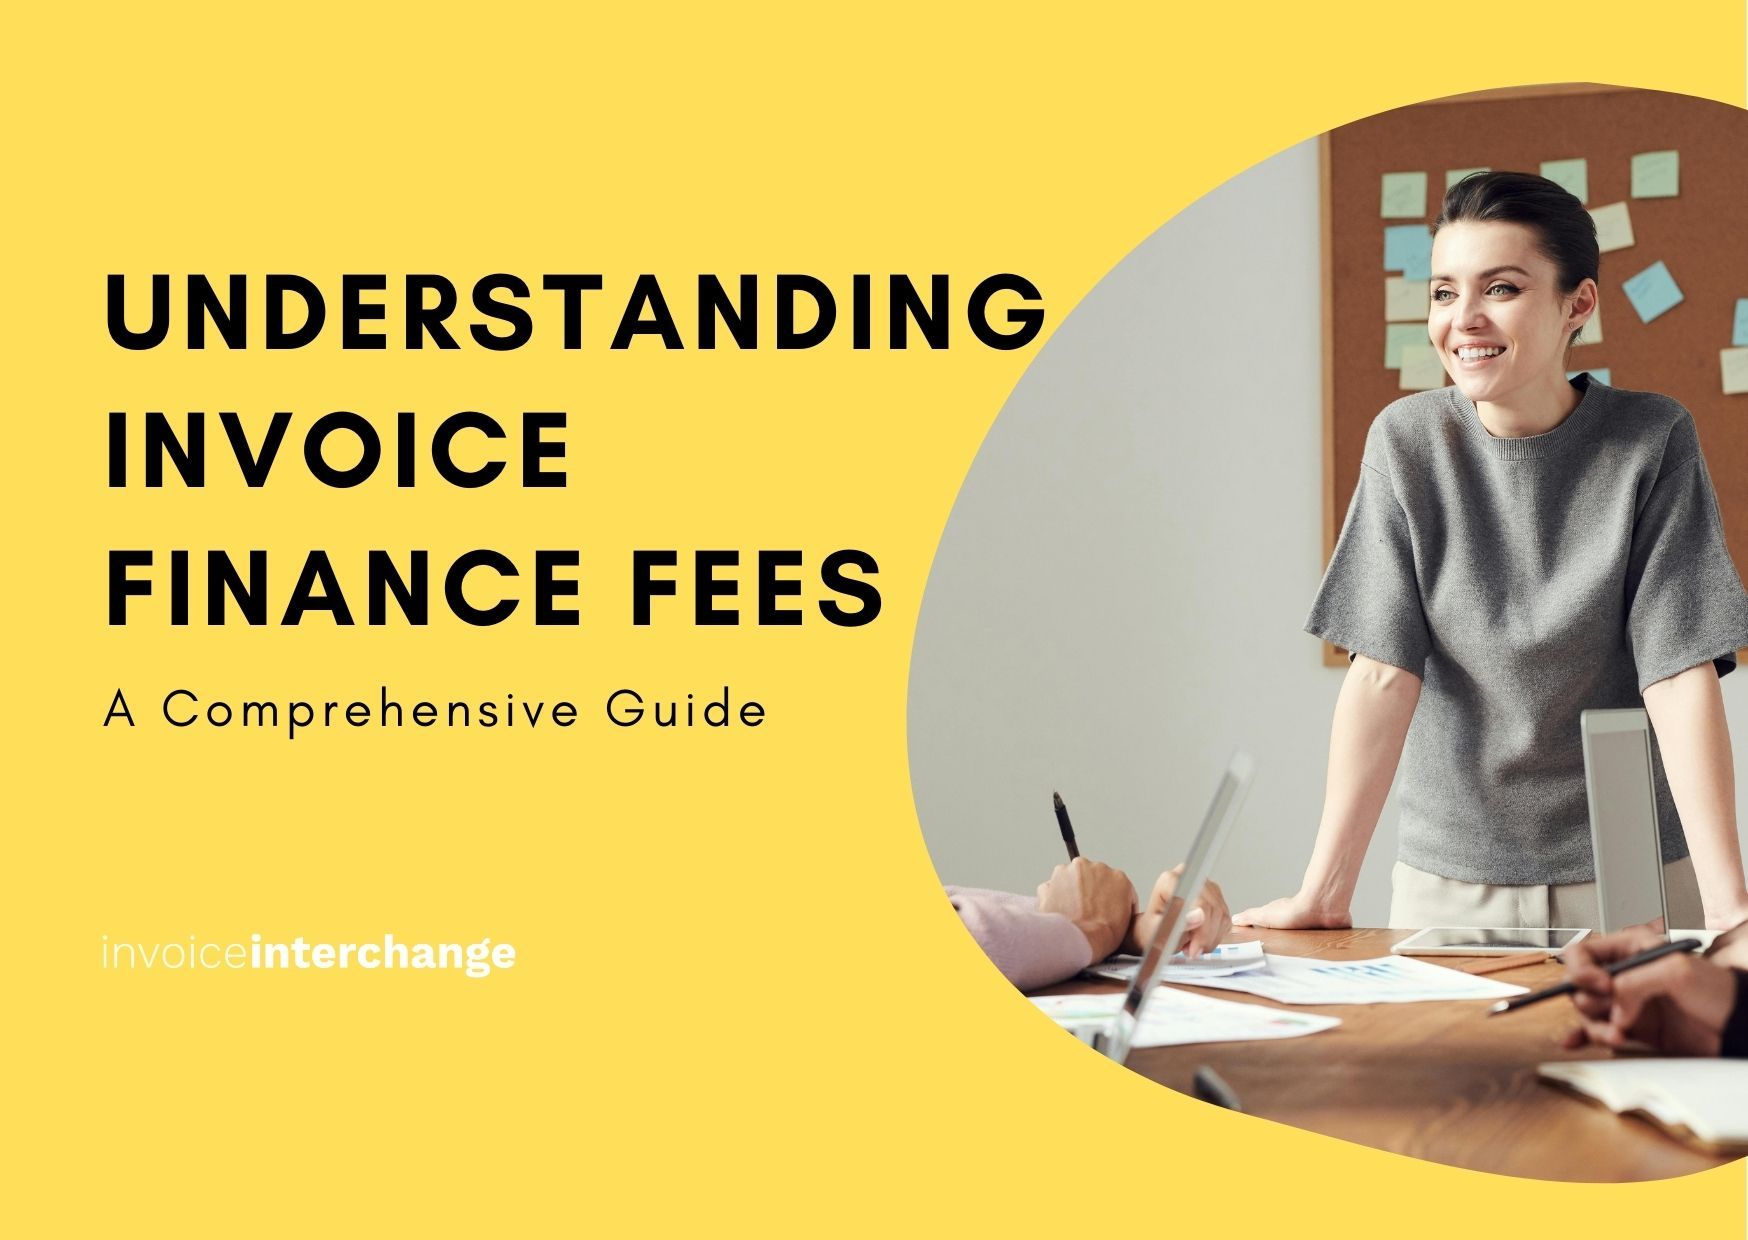 Understanding Invoice Finance Fees: A Comprehensive Guide